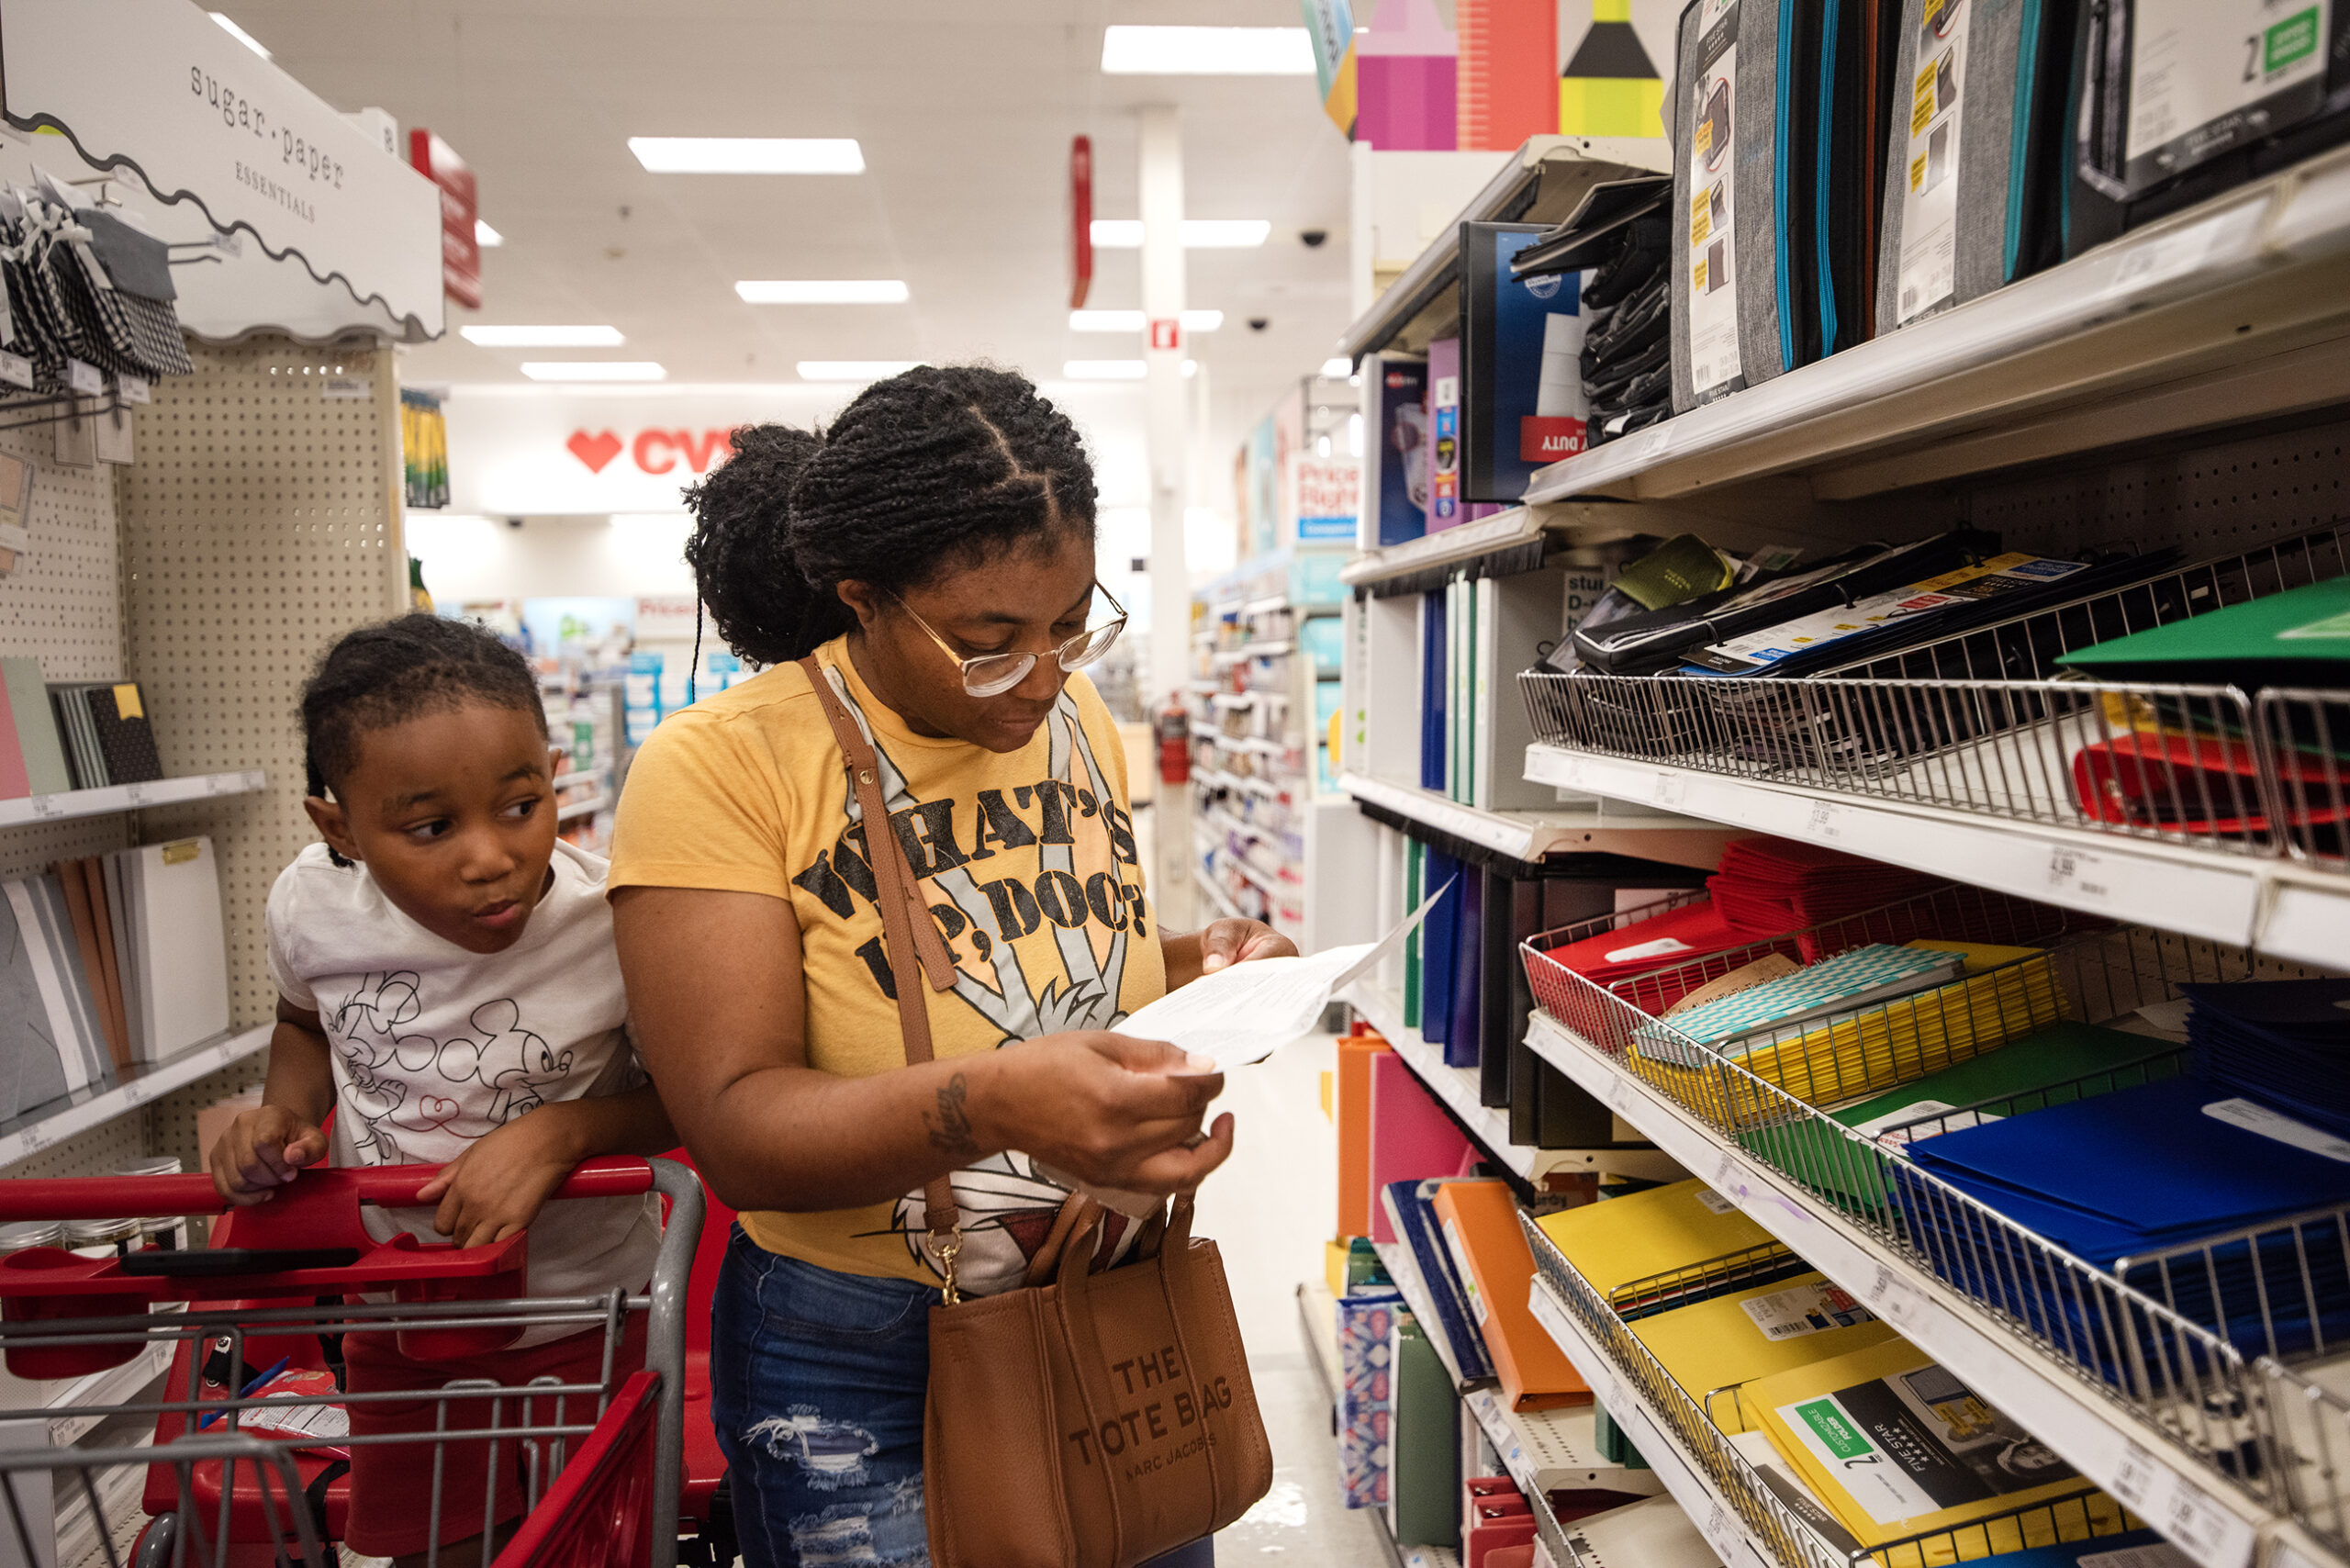 A shopper looks at a paper list while her son looks over her shoulder from the shopping cart.